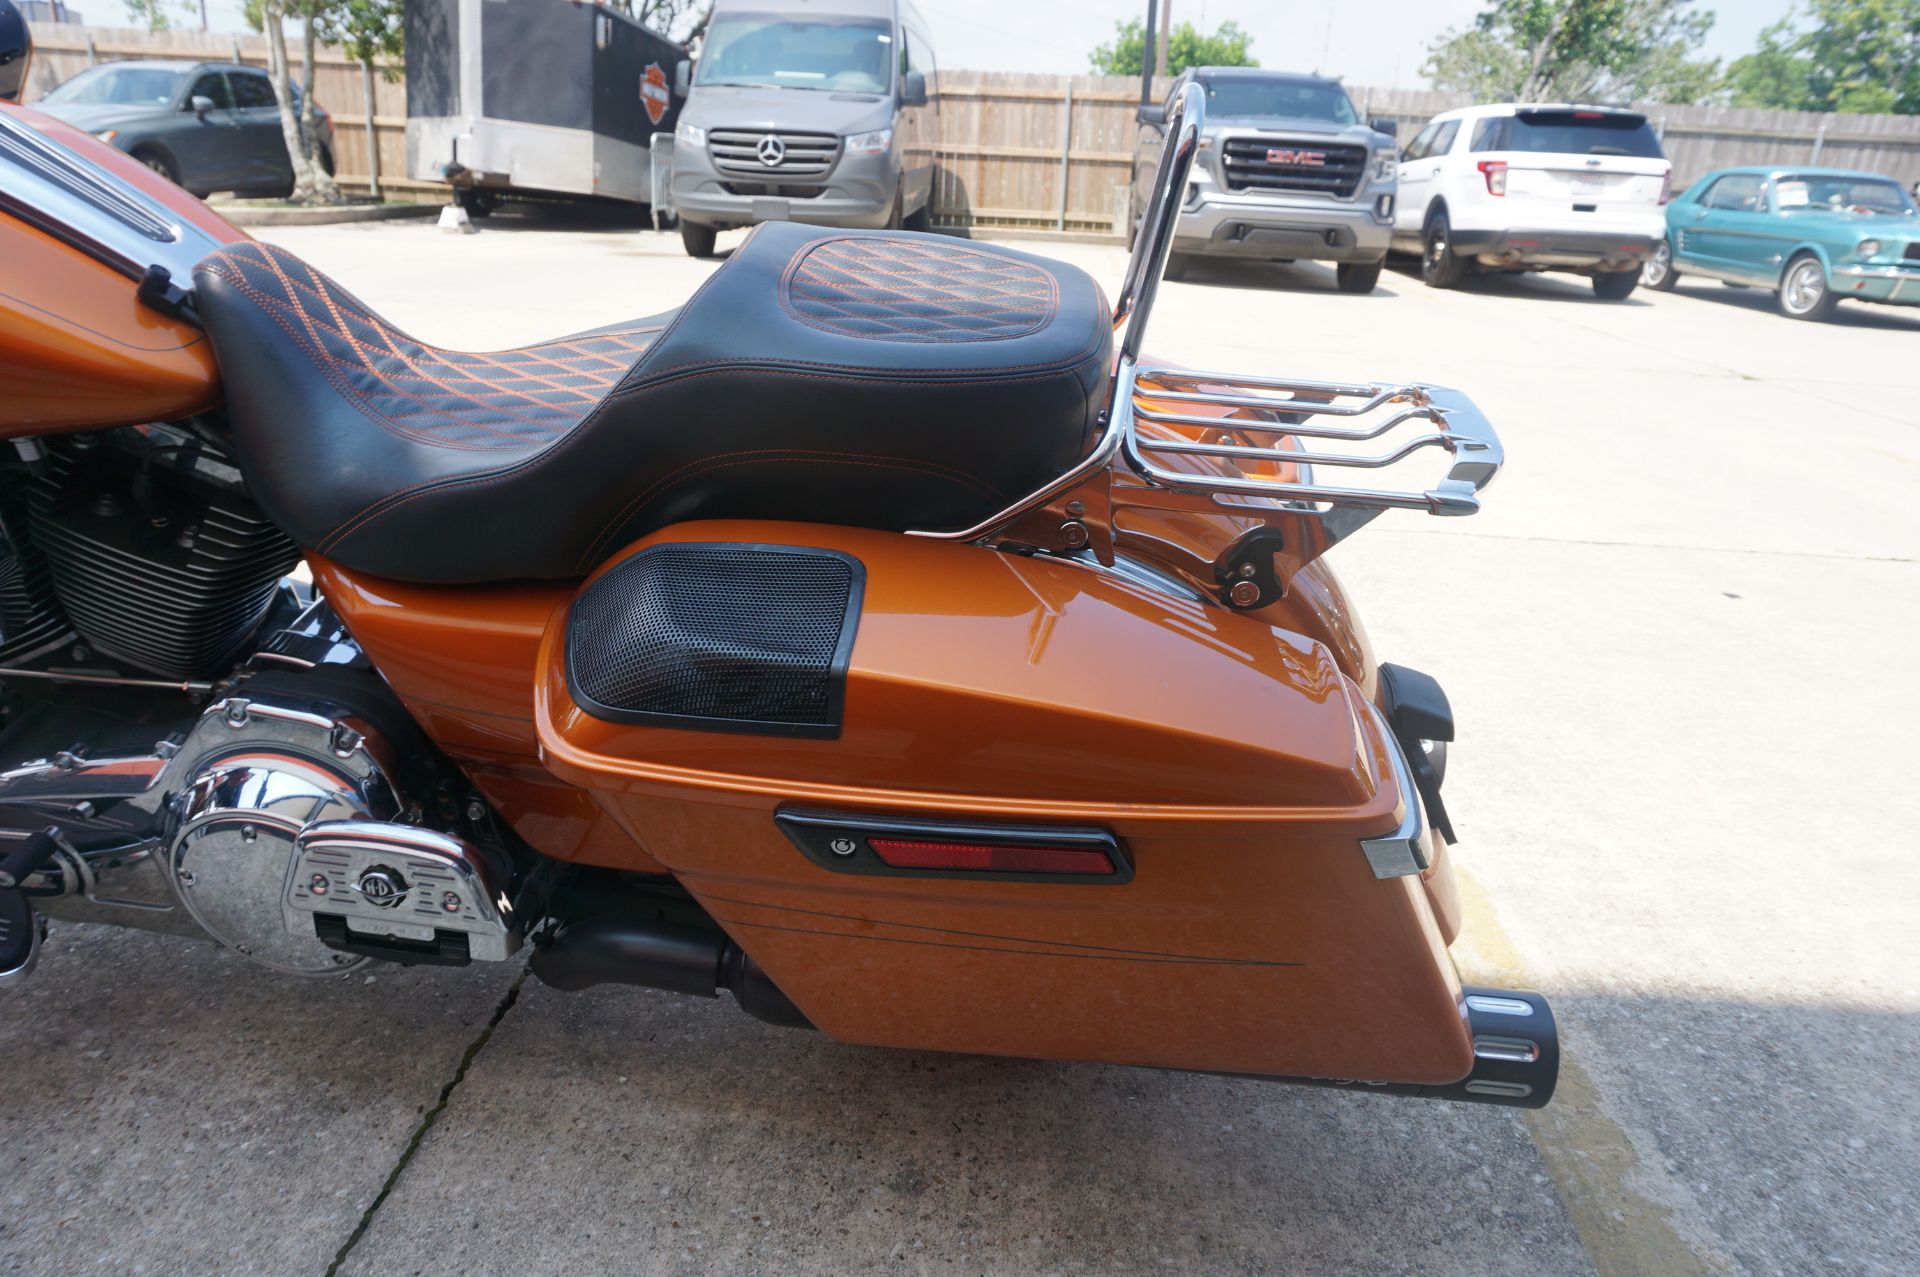 2015 Harley-Davidson Road Glide® Special in Metairie, Louisiana - Photo 9